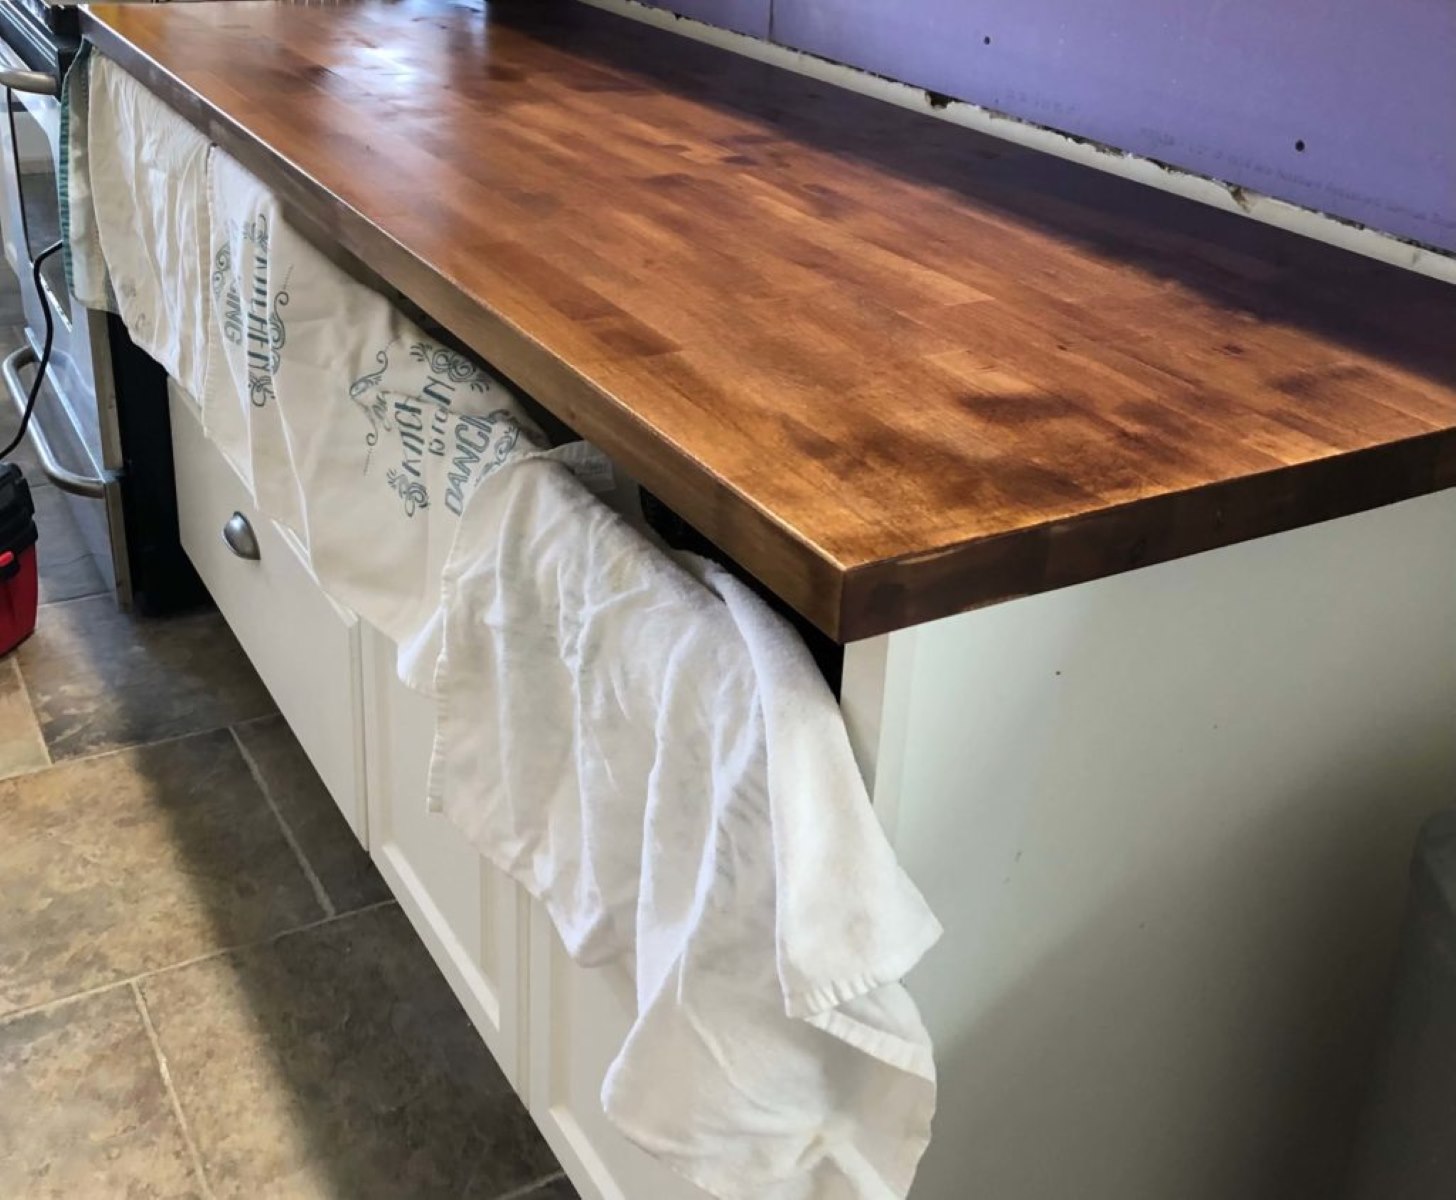 How To Stain Wood Countertops